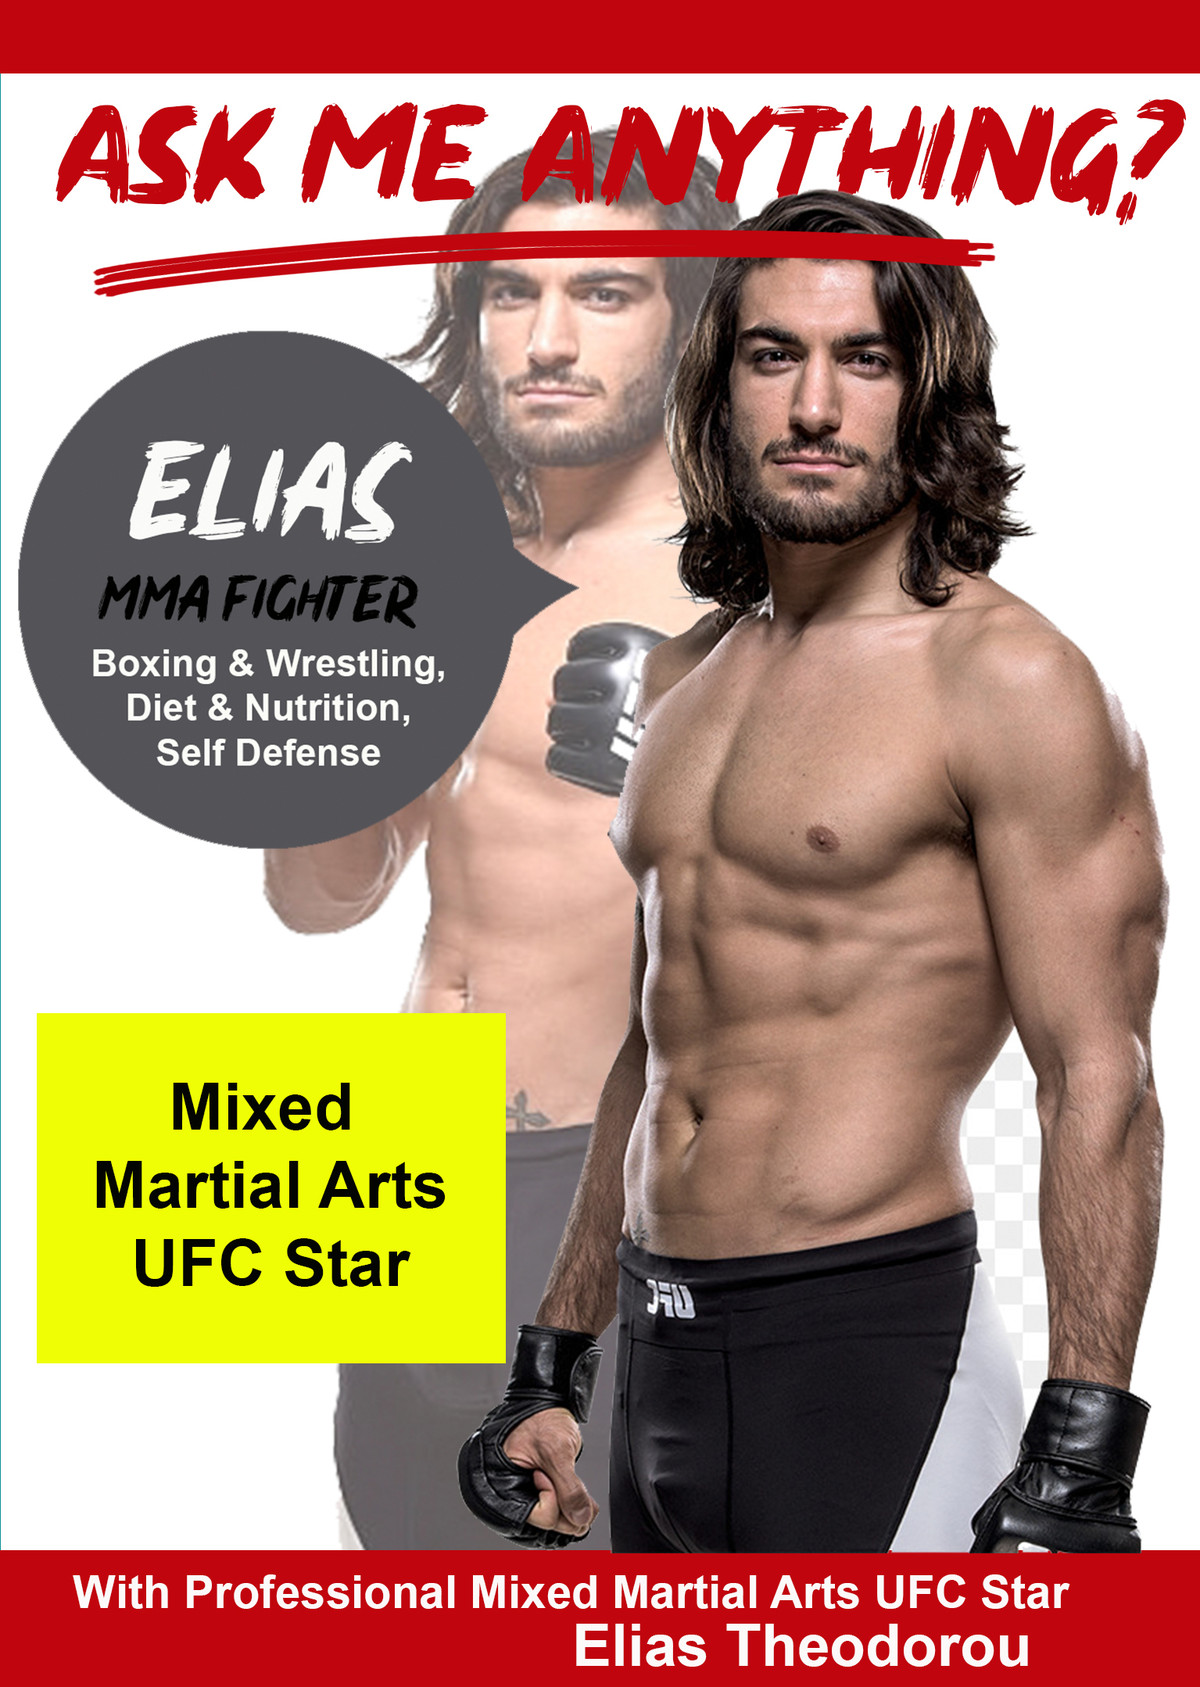 K4835 - Ask Me Anything about being a MMA Fighter with Professional Mixed Martial Arts UFC Star Elias Theodorou